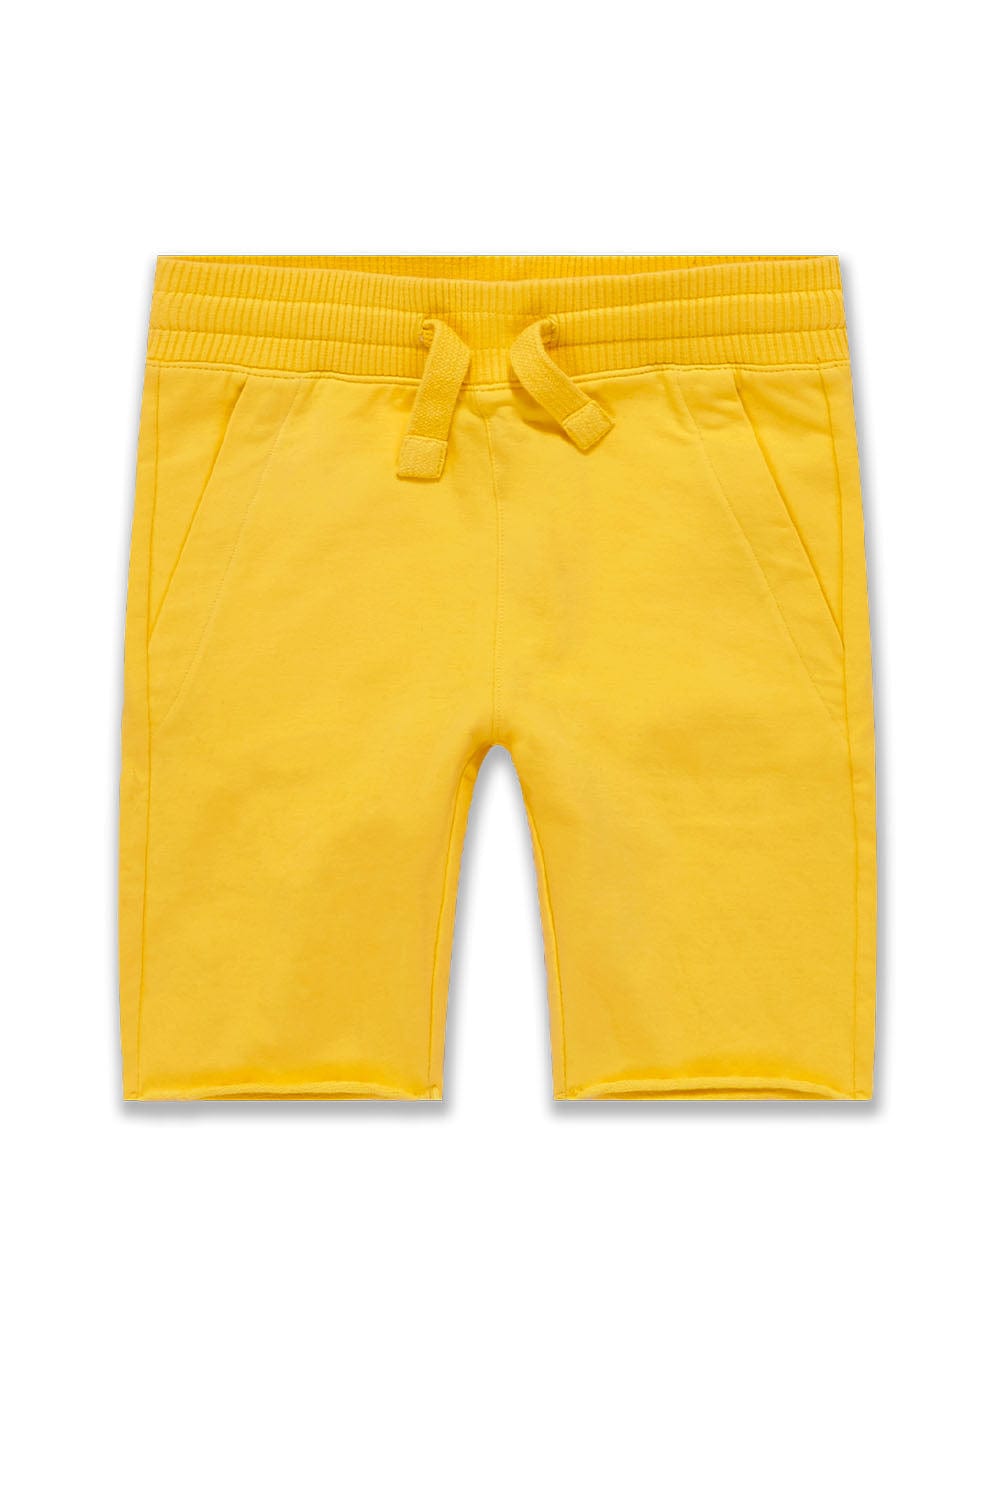 JC Kids Kids Palma French Terry Shorts (Exclusive Colors) Slicker Yellow / 2